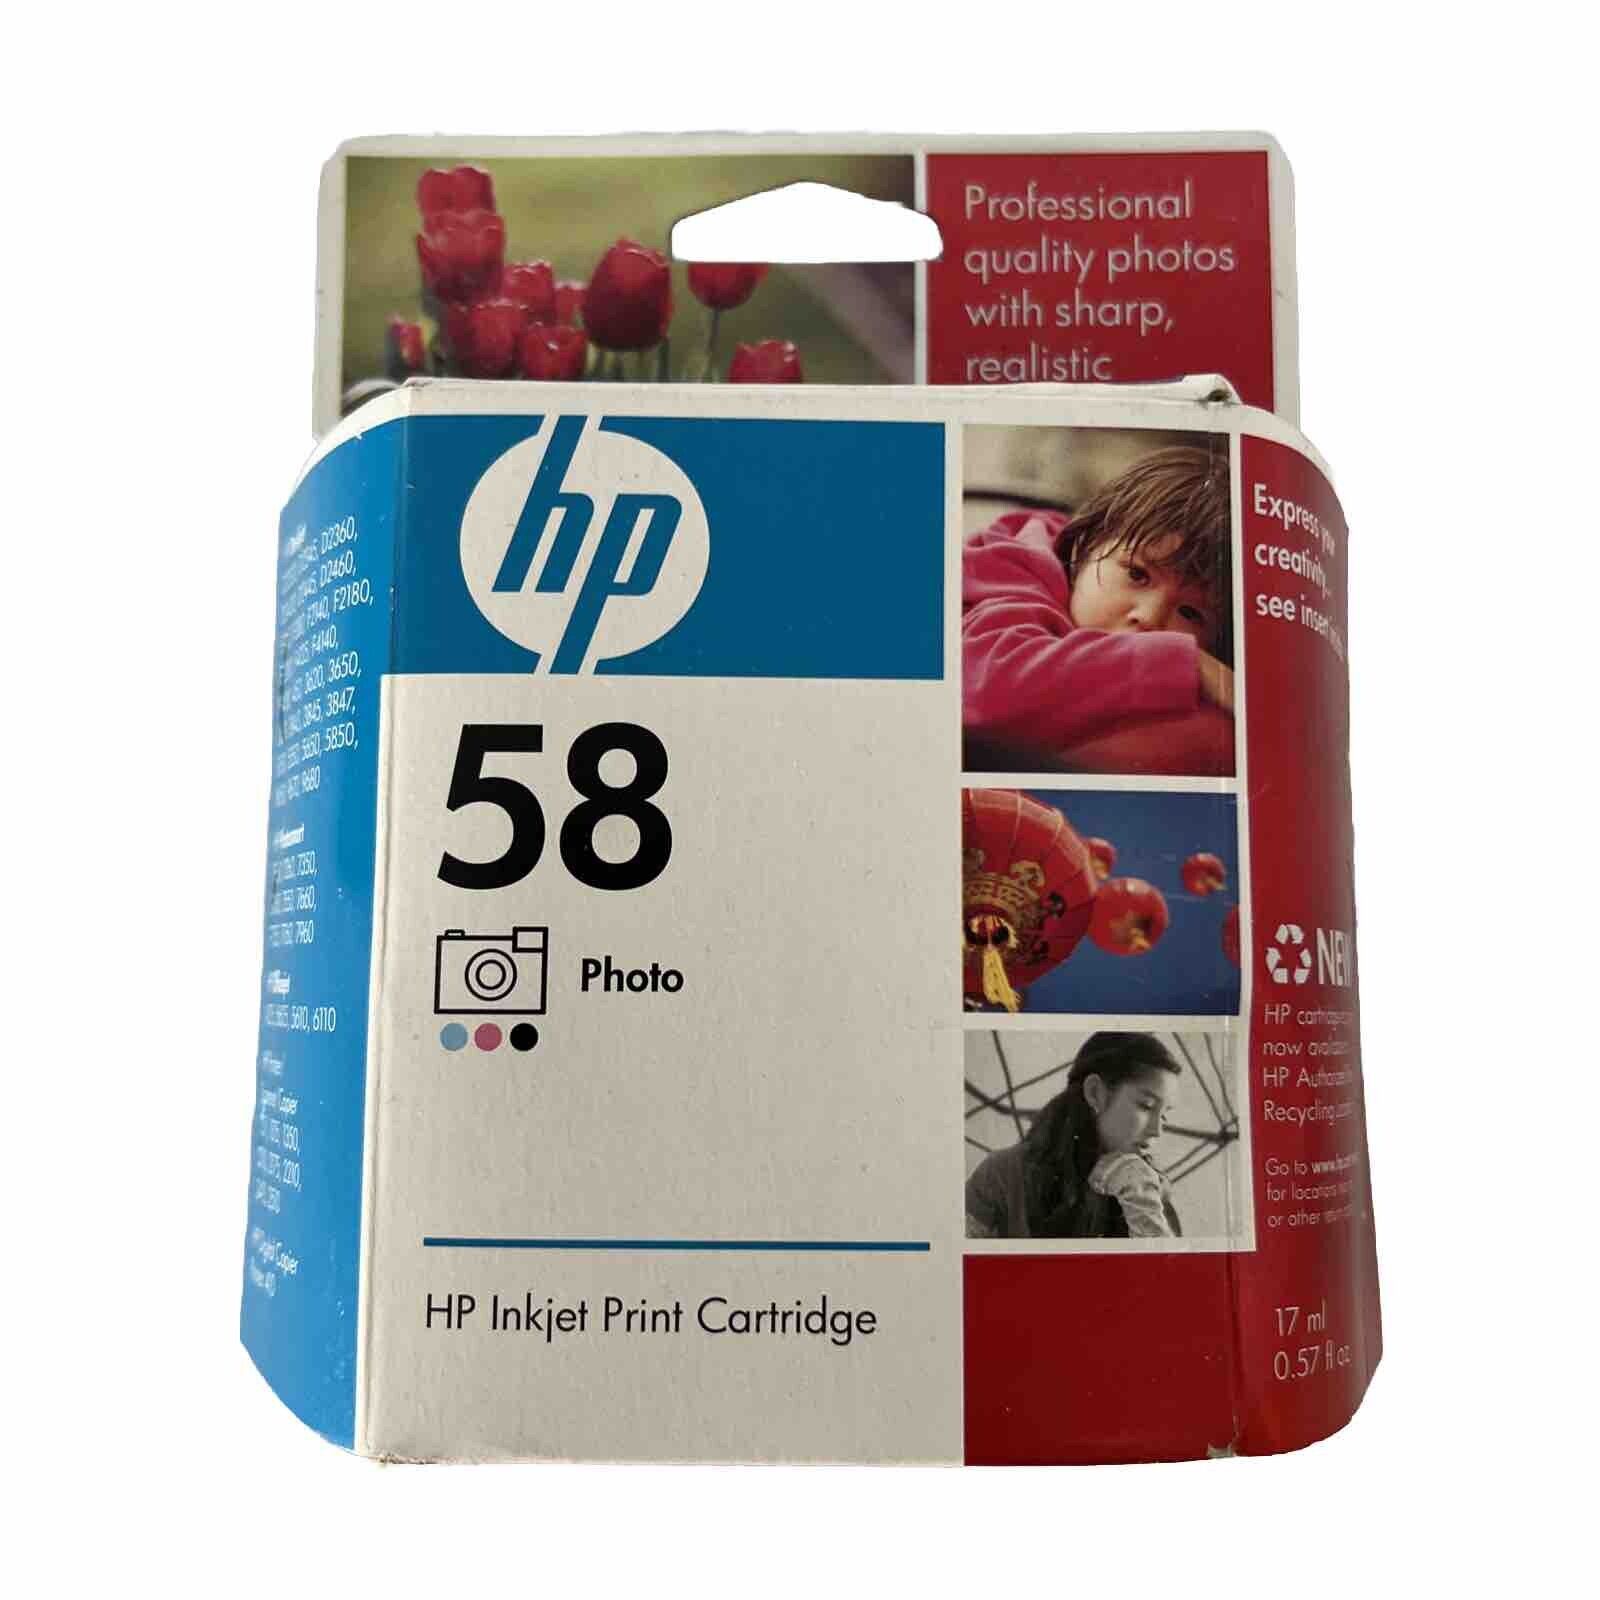 Genuine HP 58 Photo Ink Cartridges HP58 NEW Sealed In Box Expired 2010